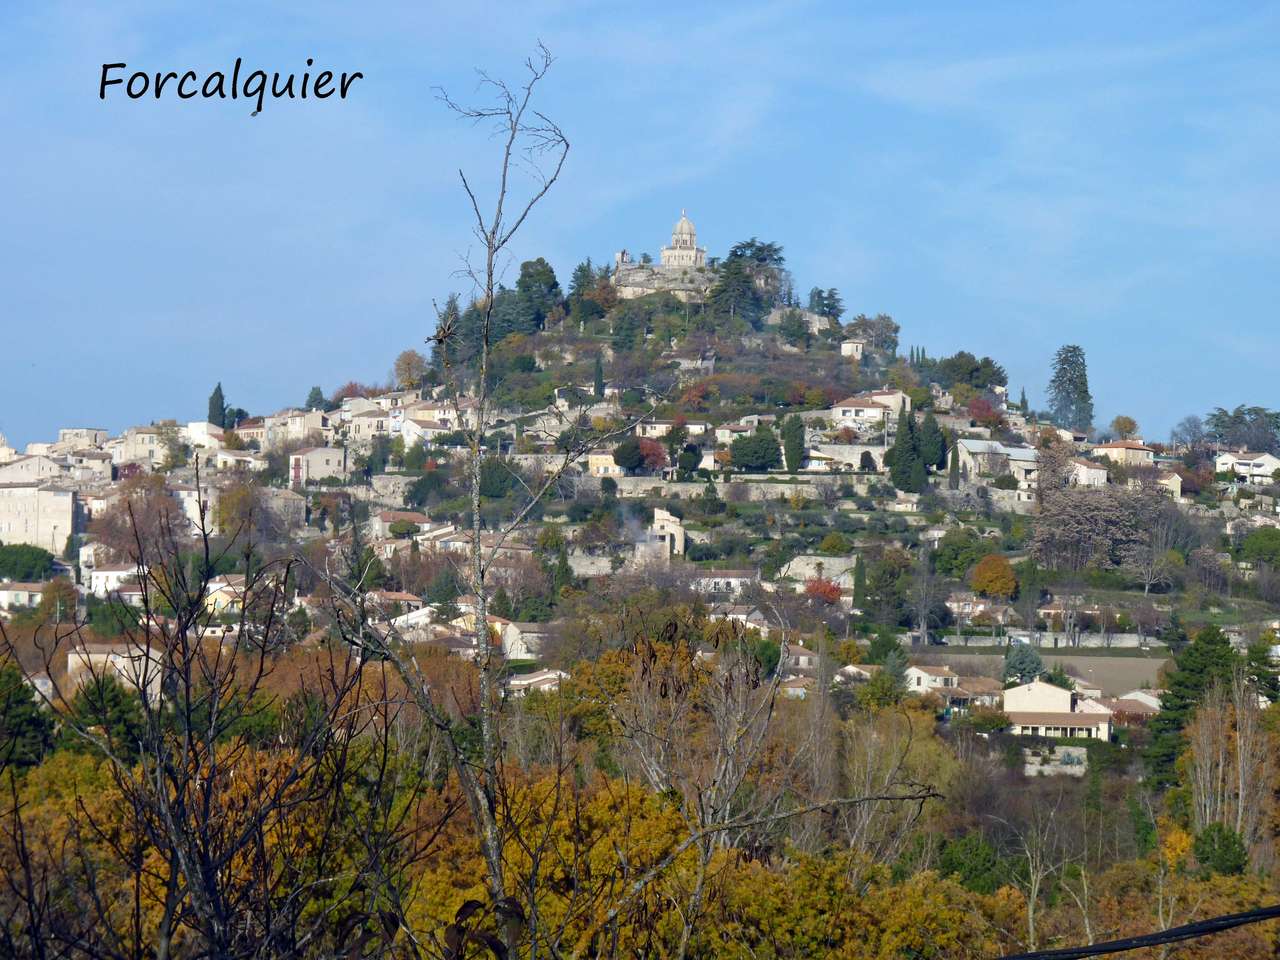 view of Forcalquier online puzzle